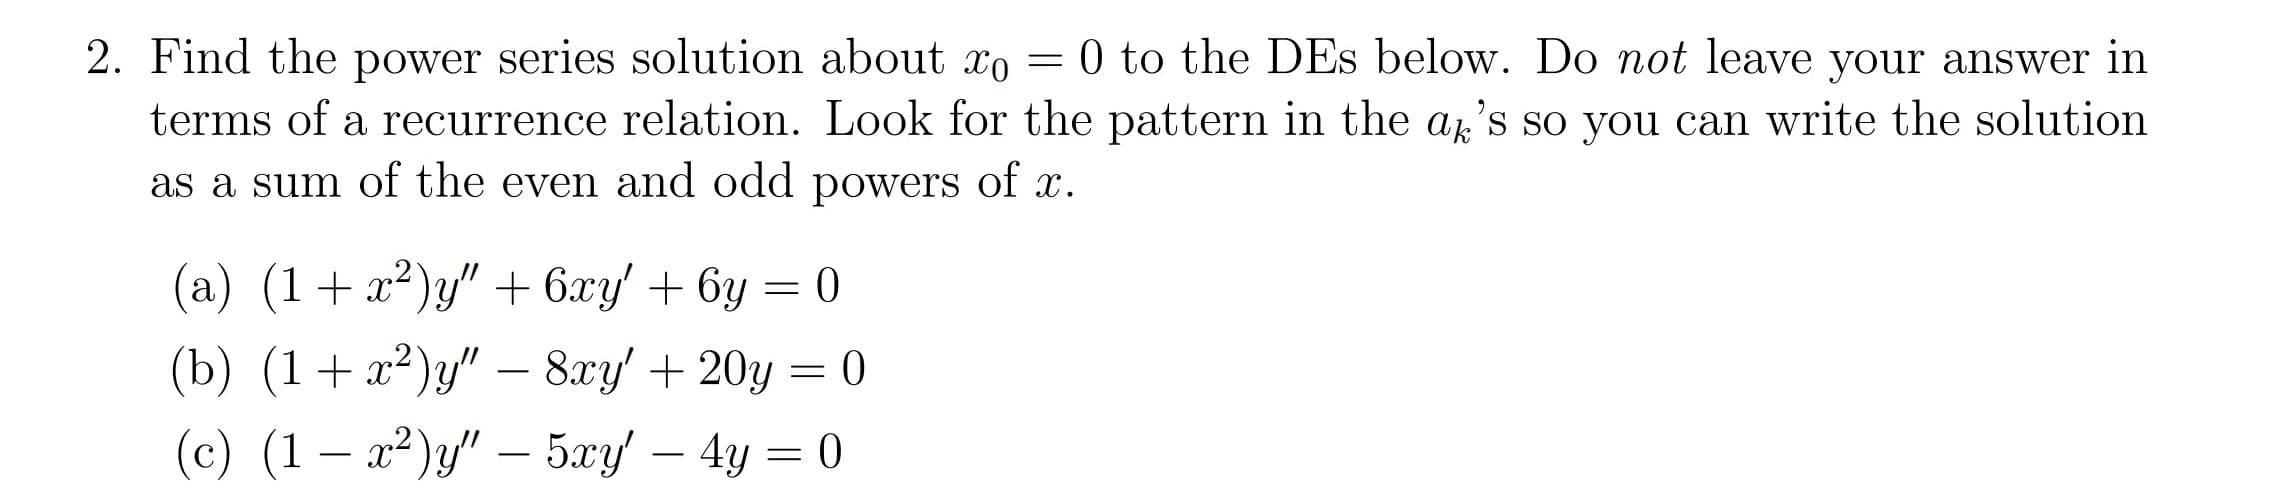 0 to the DEs below. Do not leave your answer in
2. Find the power series solution about xo
terms of a recurrence relation. Look for the pattern in the a's so you can write the solution
as a sum of the even and odd powers of x.
y" 6xy 6y =0
(a) (1
(b) (1 y- 8ry/ 20y
(c) (1 2 5ry 4y
0
